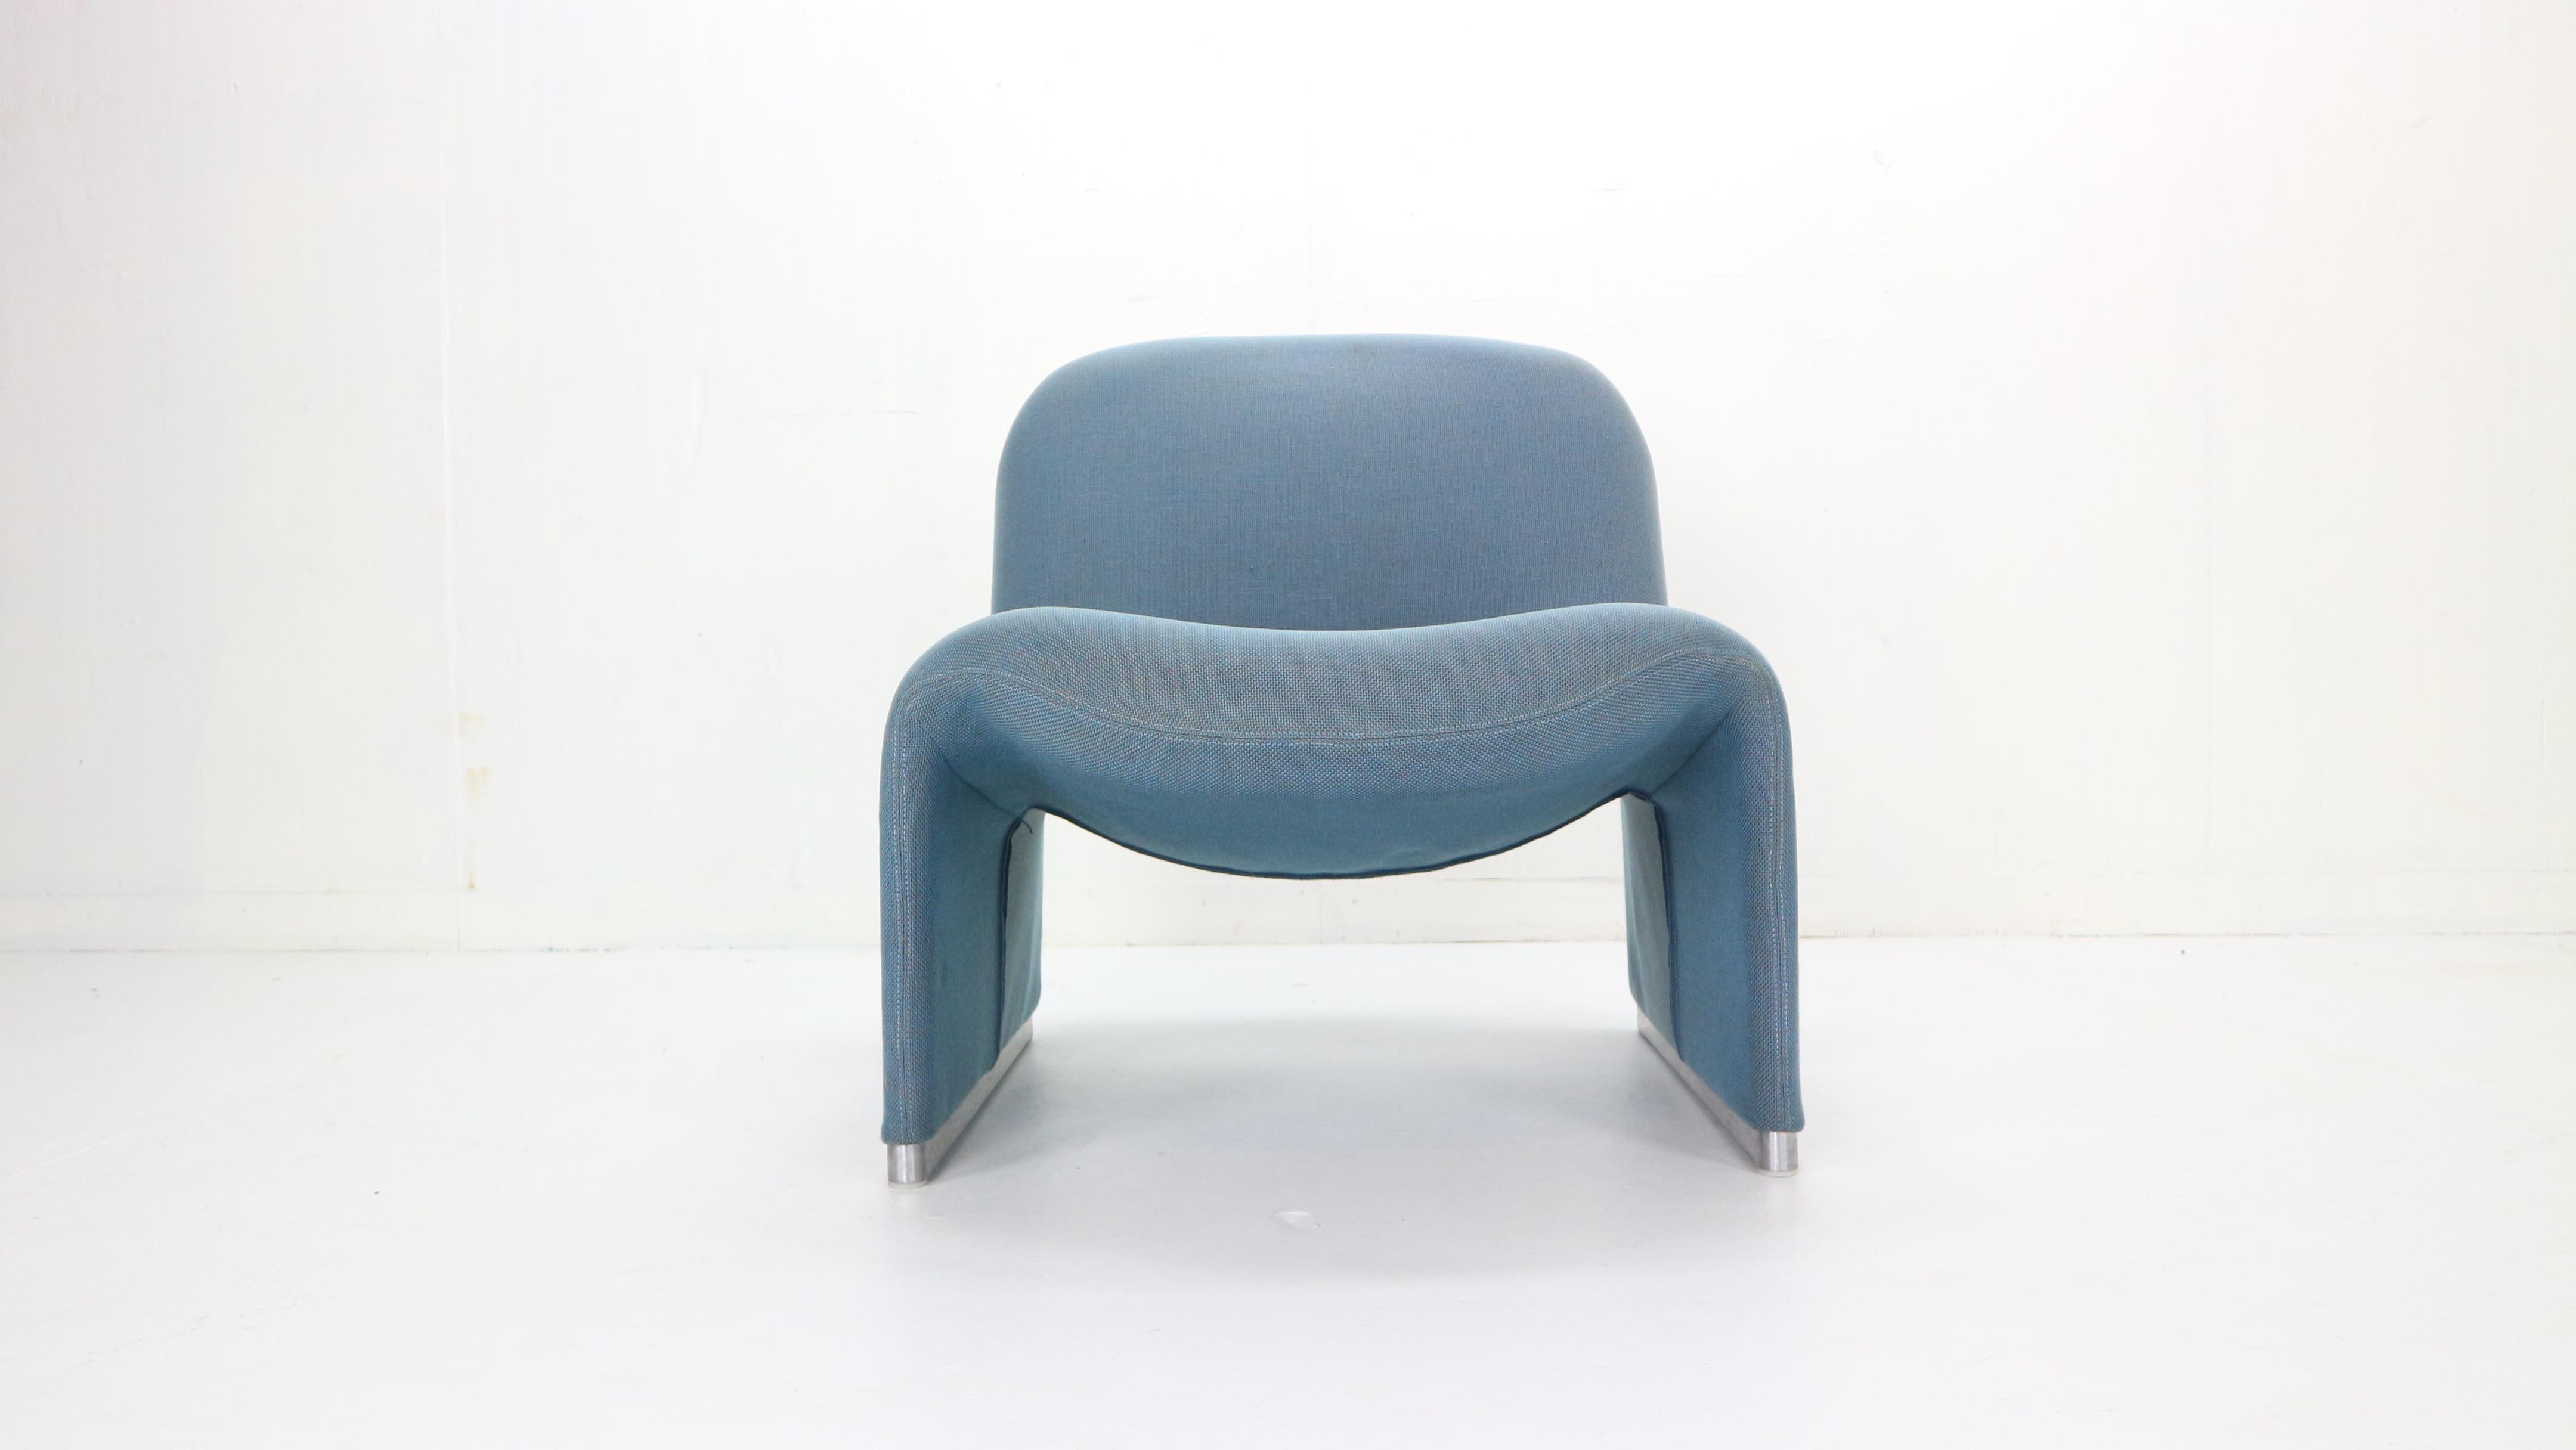 'Alky' slipper lounge chair was designed by Giancarlo Piretti and produced by the Italian maker Castelli during the 1970s period.
Made with fabric over foam over an aluminium base, the Alky chair is well-known for being a multifunctional design